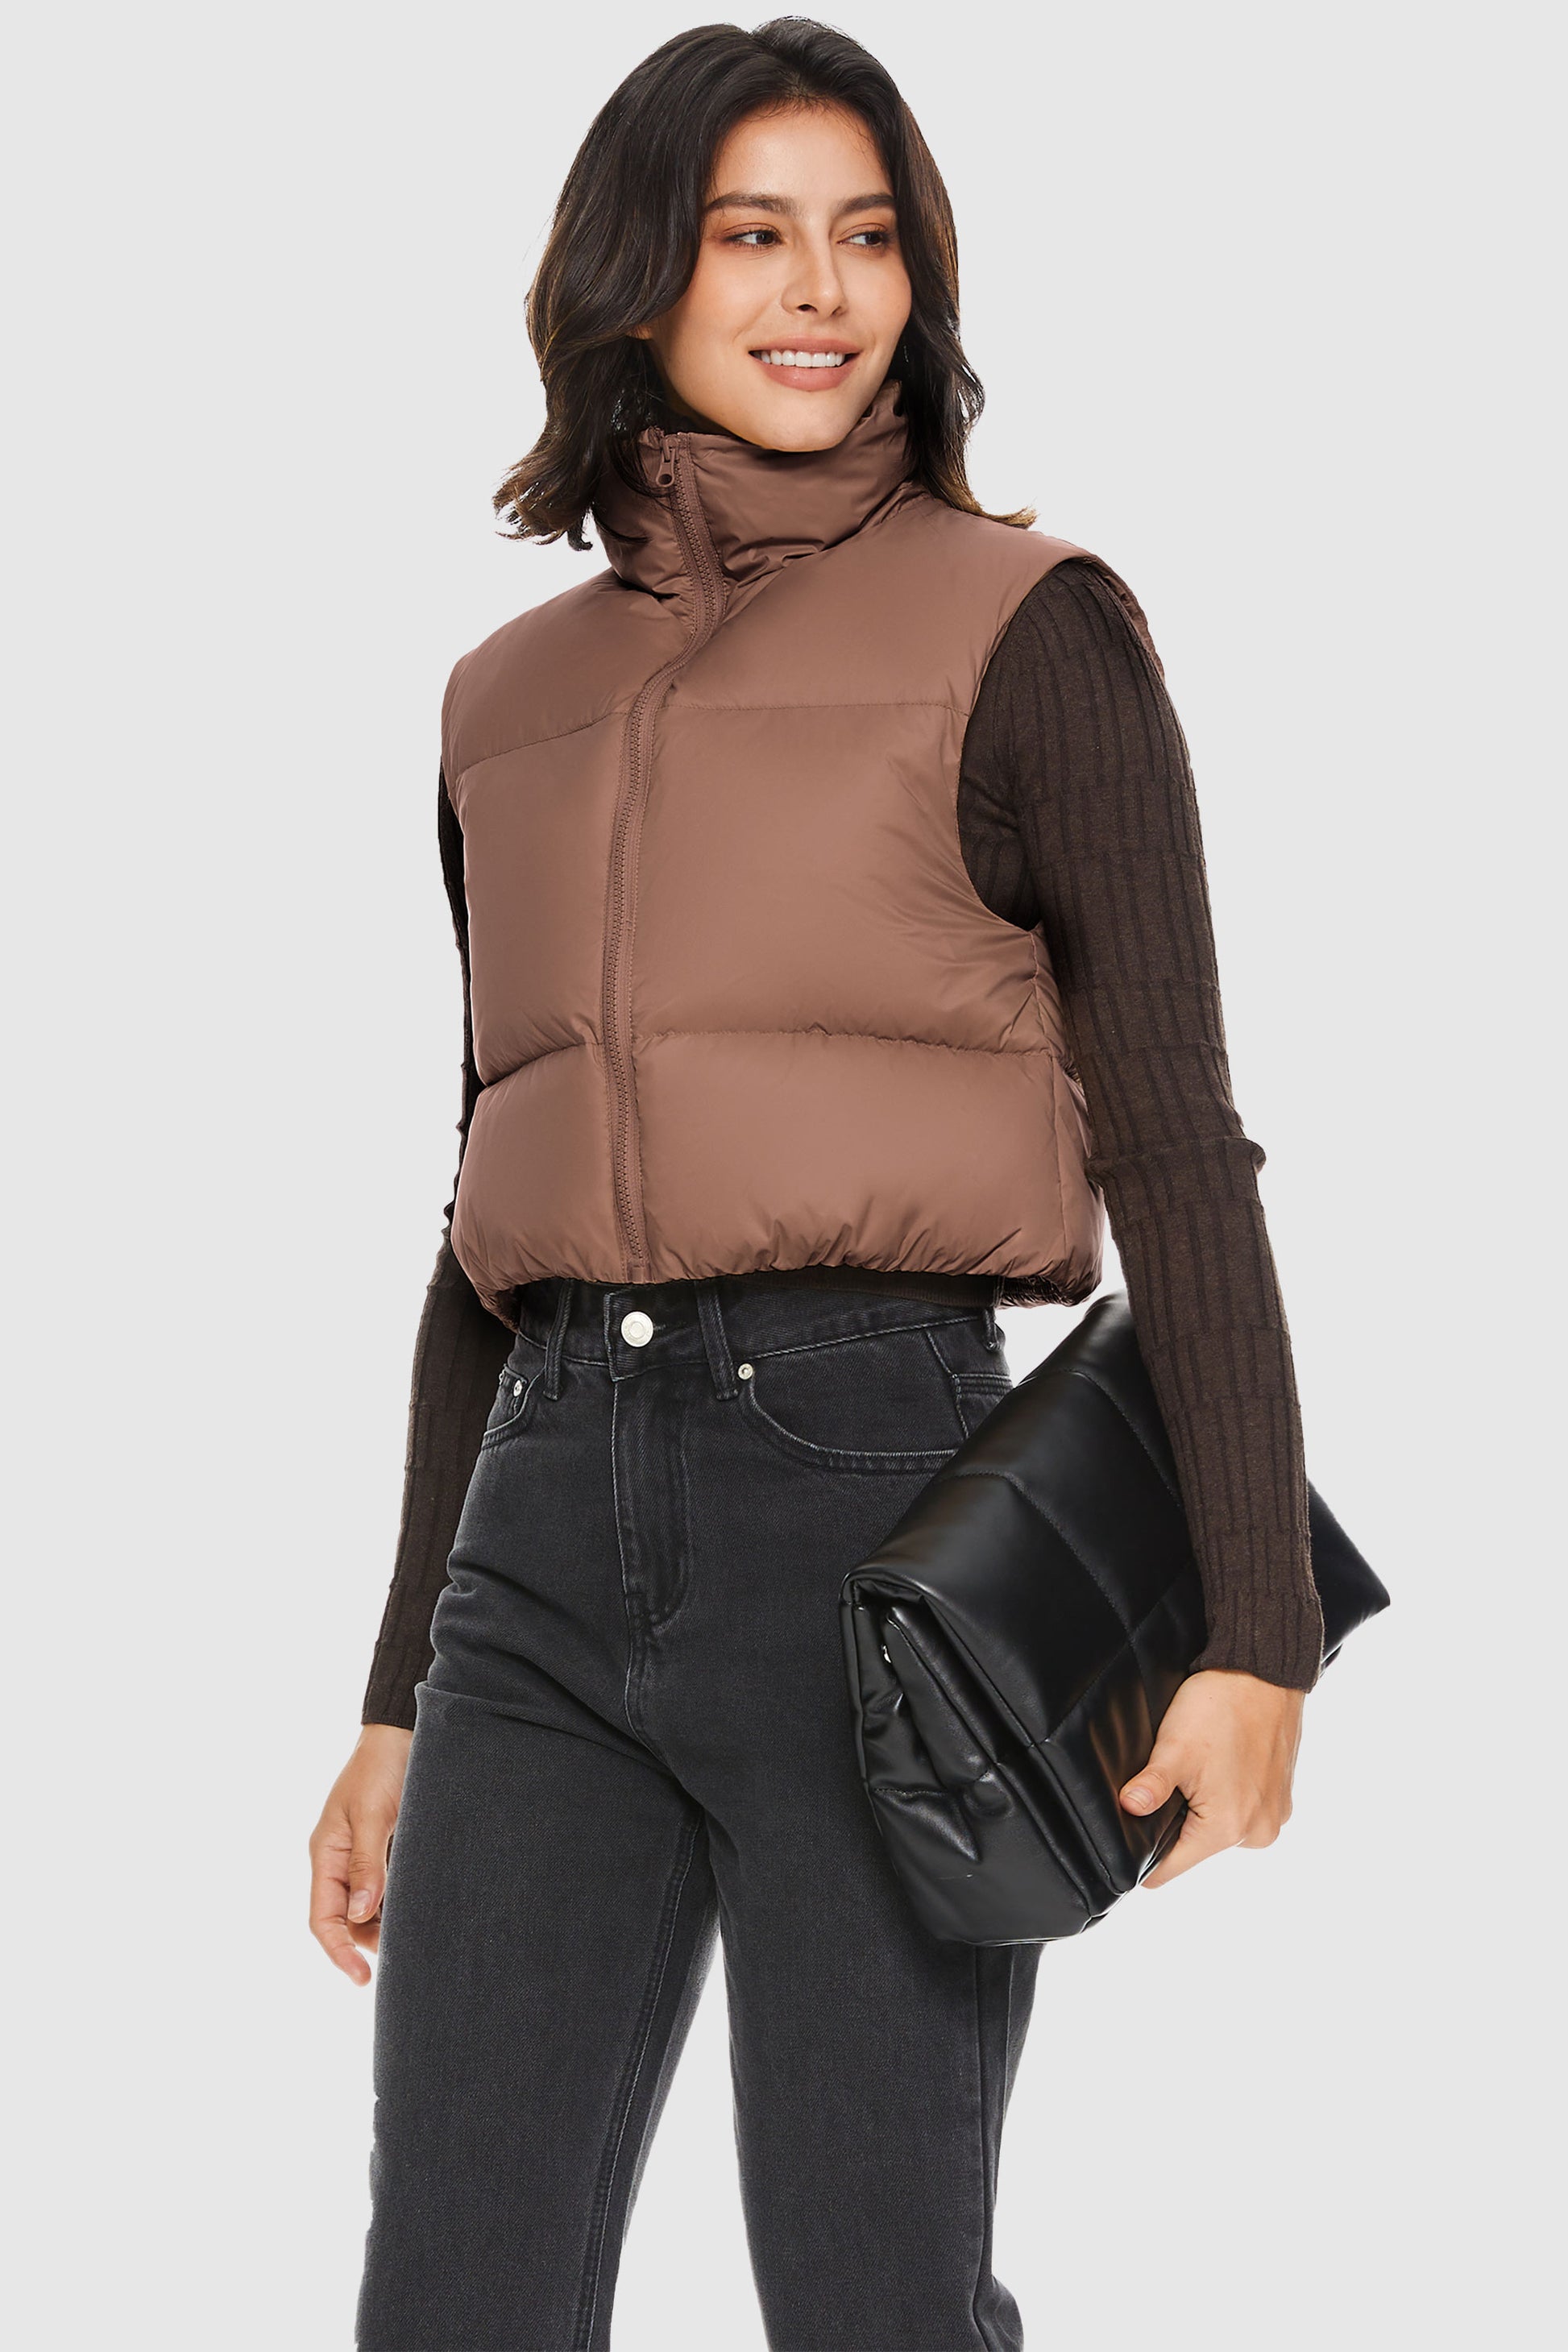 Women's Brown Puffer Vest- Brown Cropped Puffer Vest- Entro Clothing Vest Small